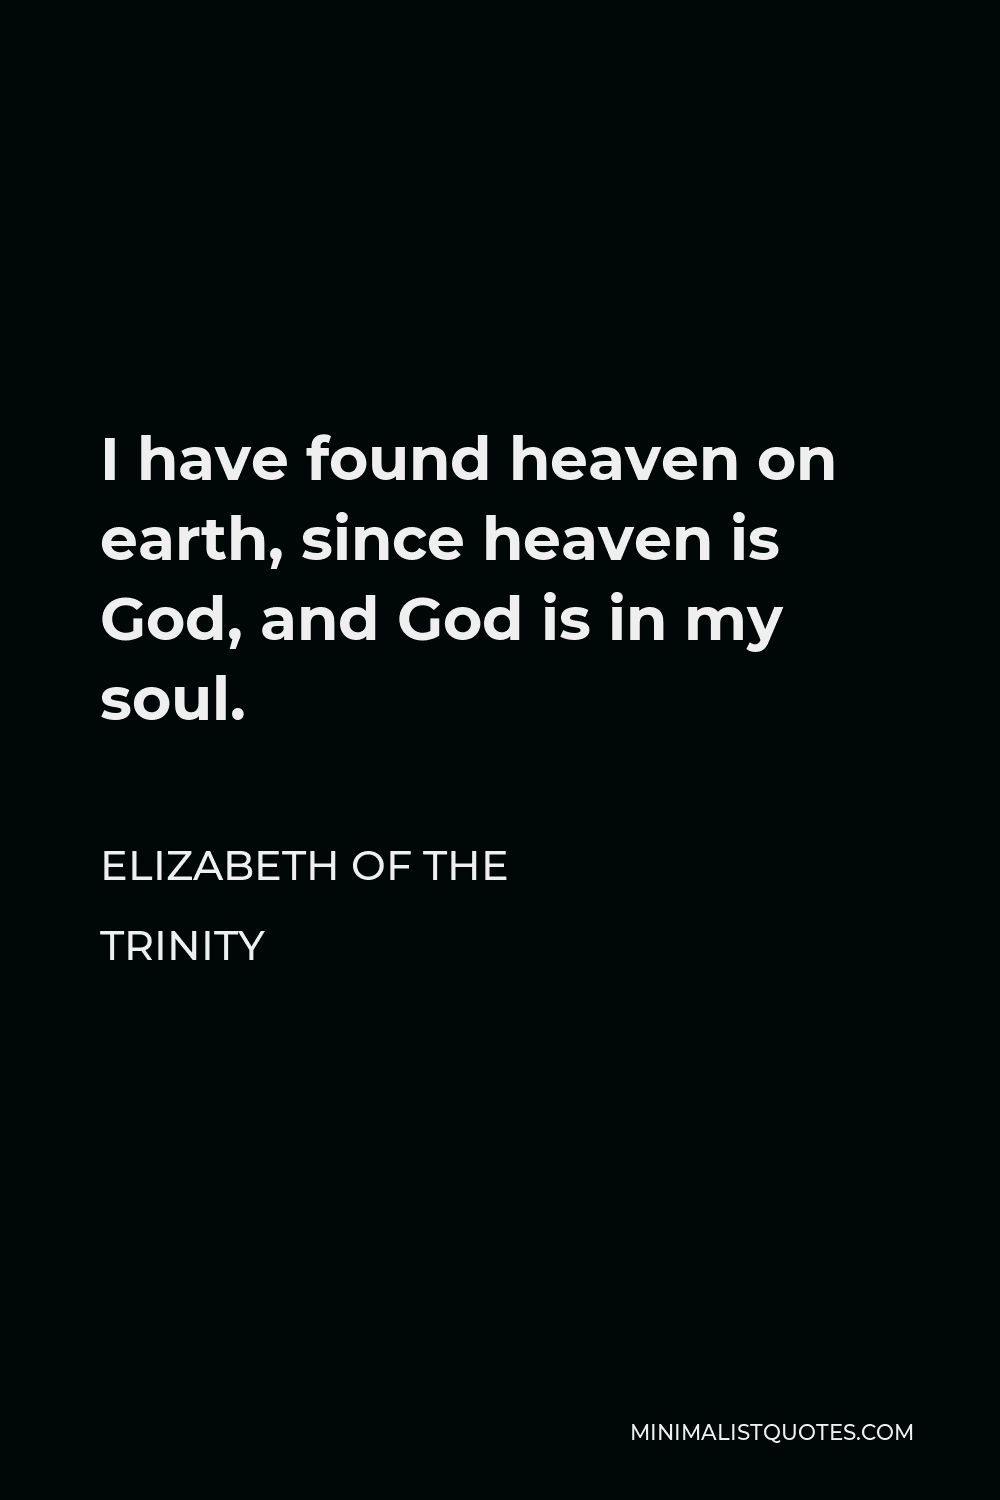 Elizabeth of the Trinity Quote - I have found heaven on earth, since heaven is God, and God is in my soul.